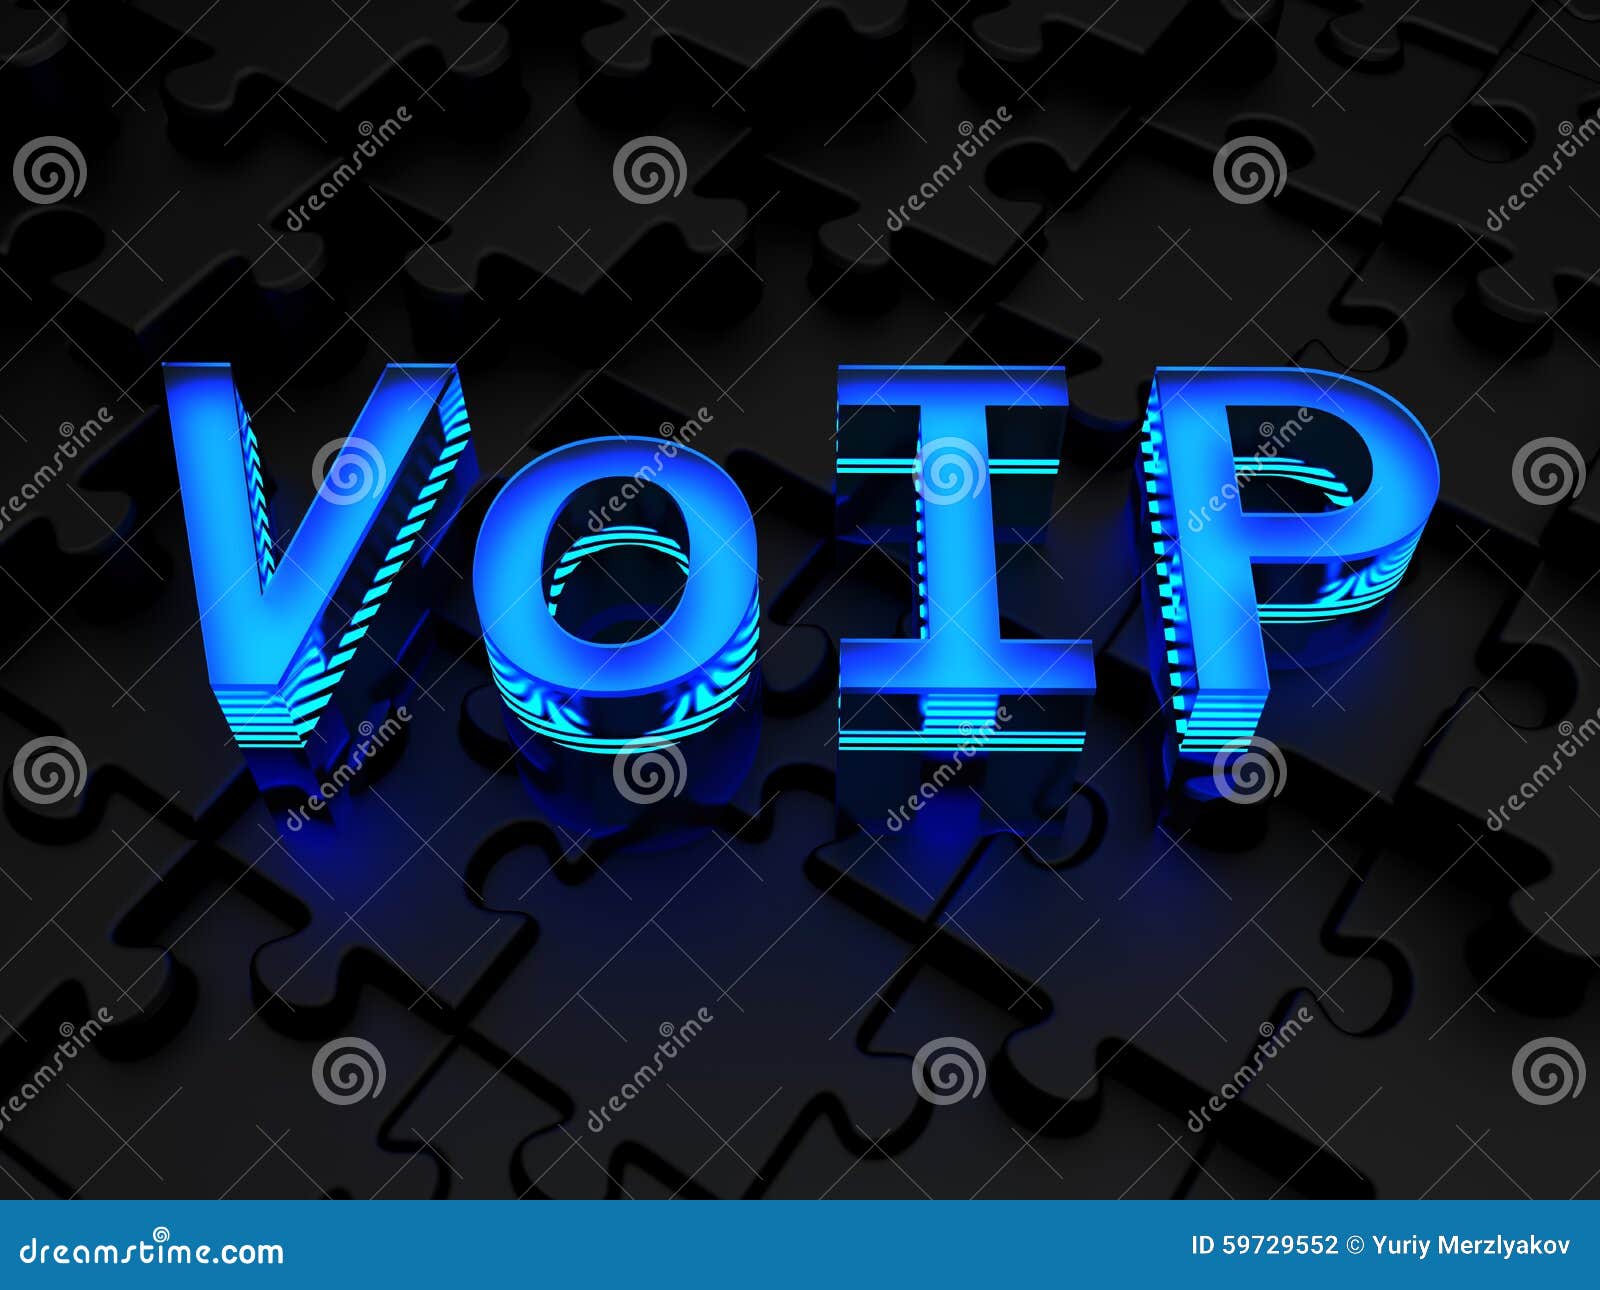 voip (voice over internet protocol)